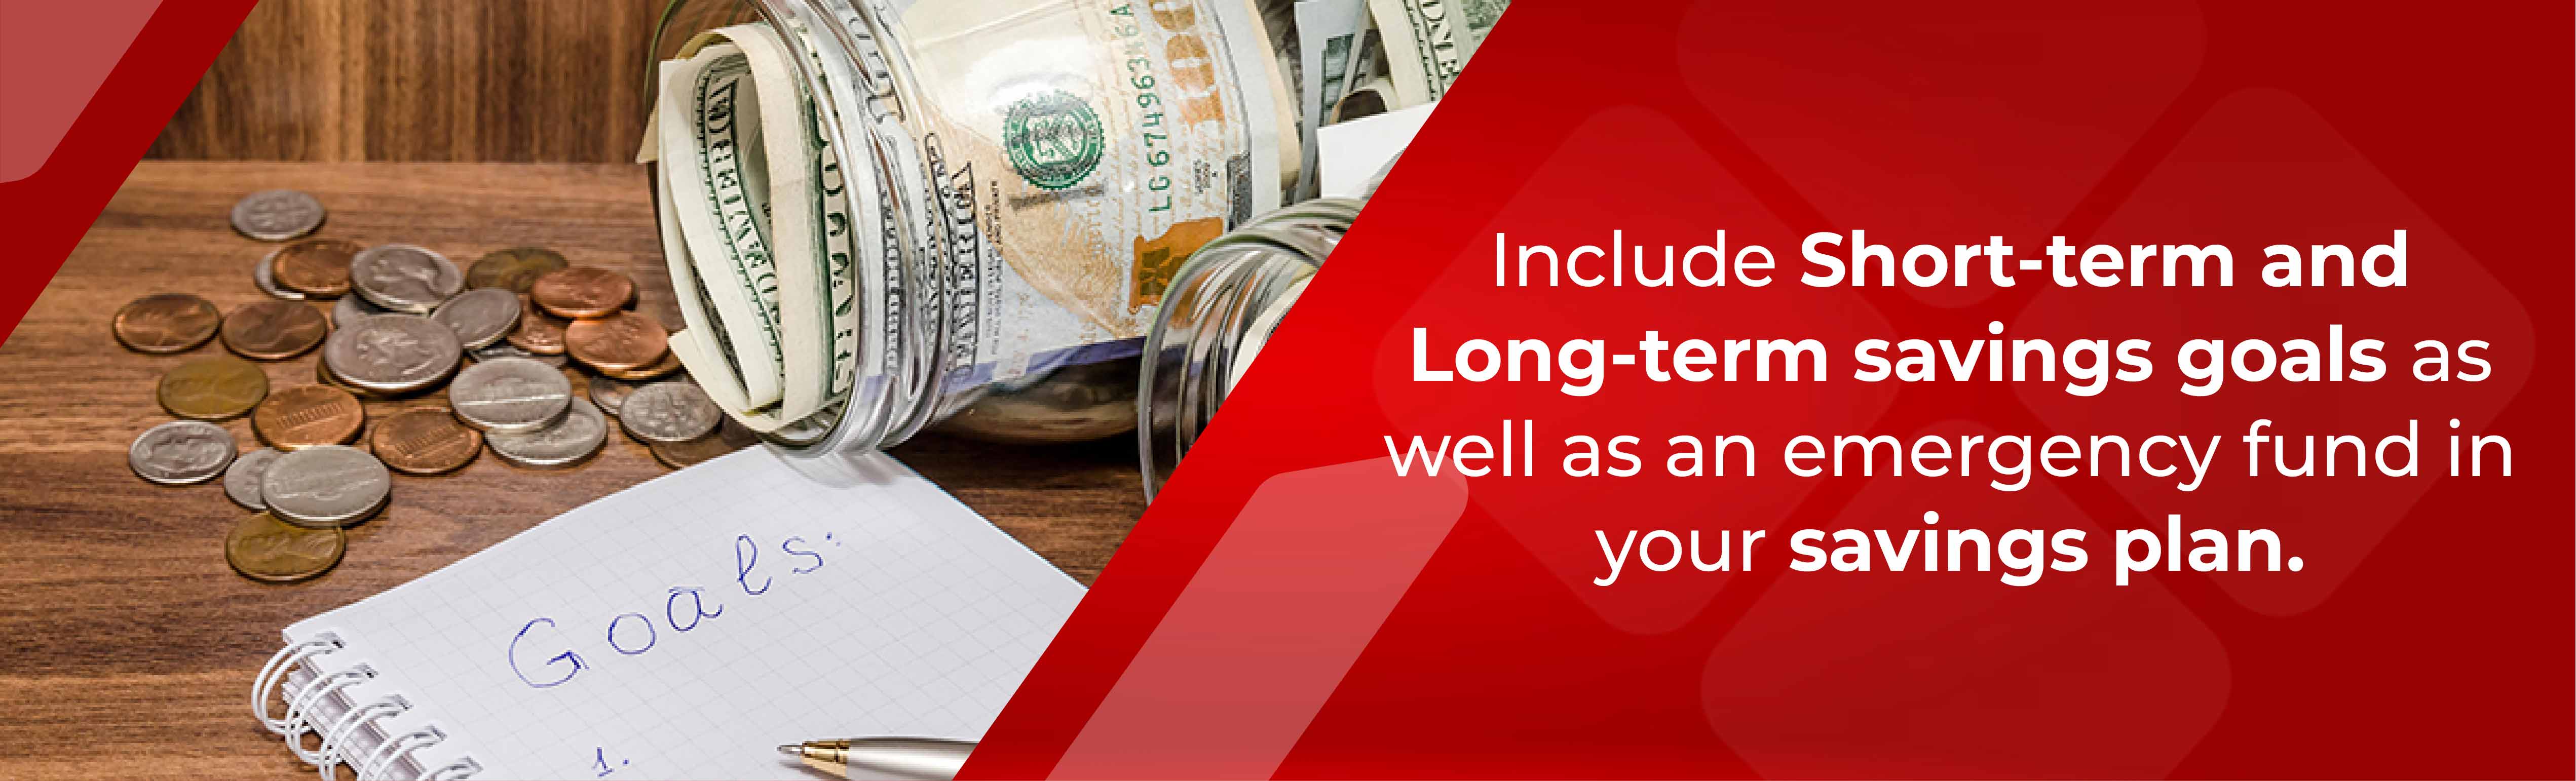 Include short-term and long-term savings goals as well as an emergency fund in your savings plan.